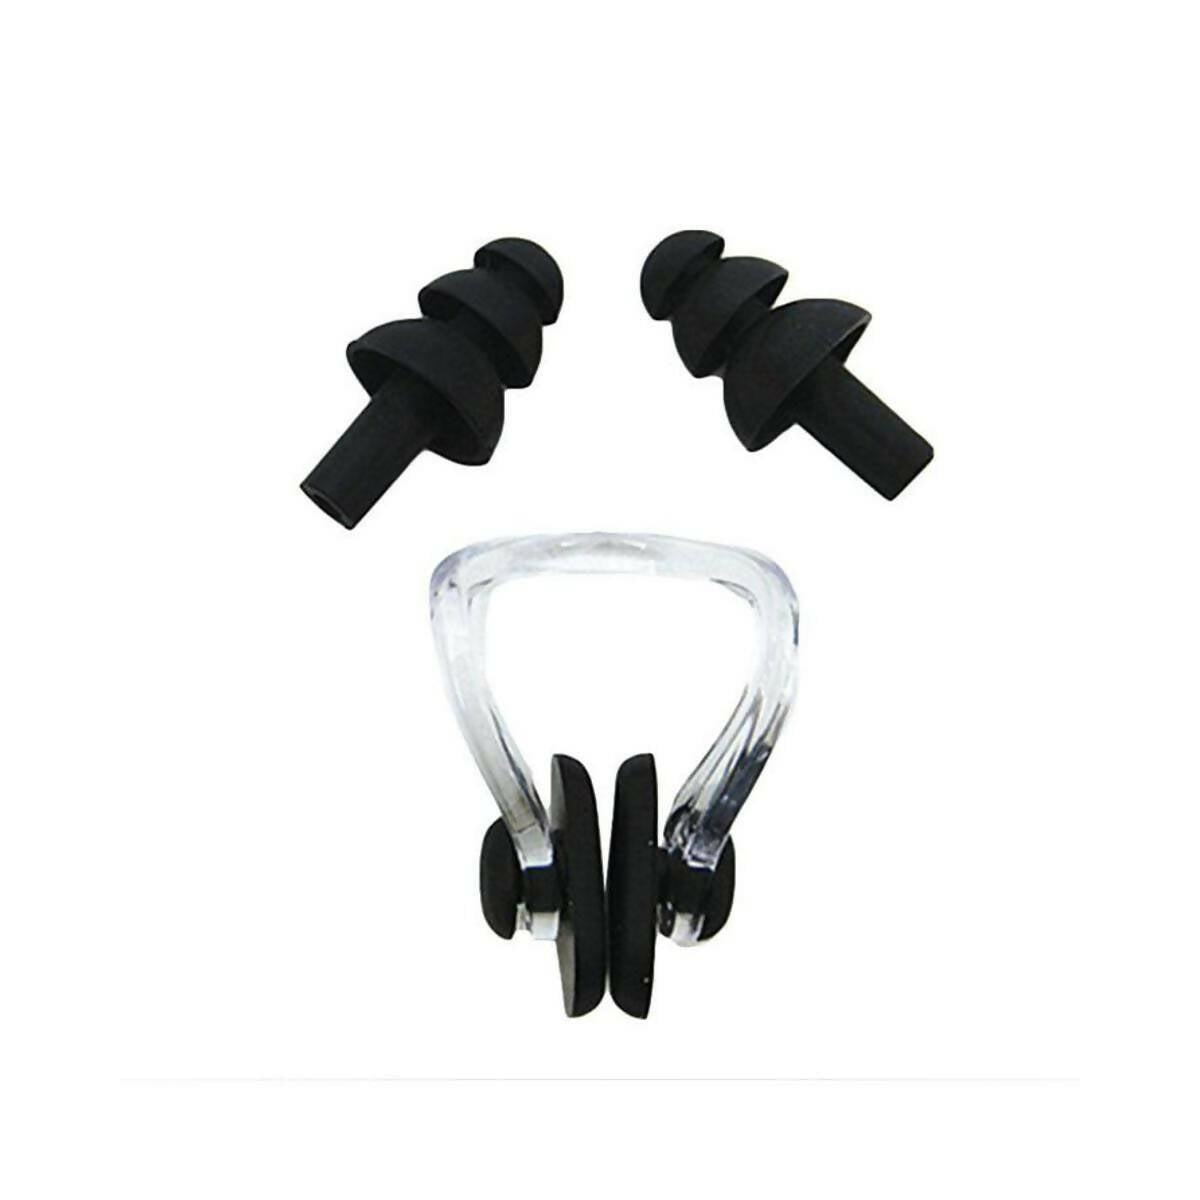 Soft Silicone Swimming Set Waterproof Nose Clip Ear Plug Set with Protective Case - Black